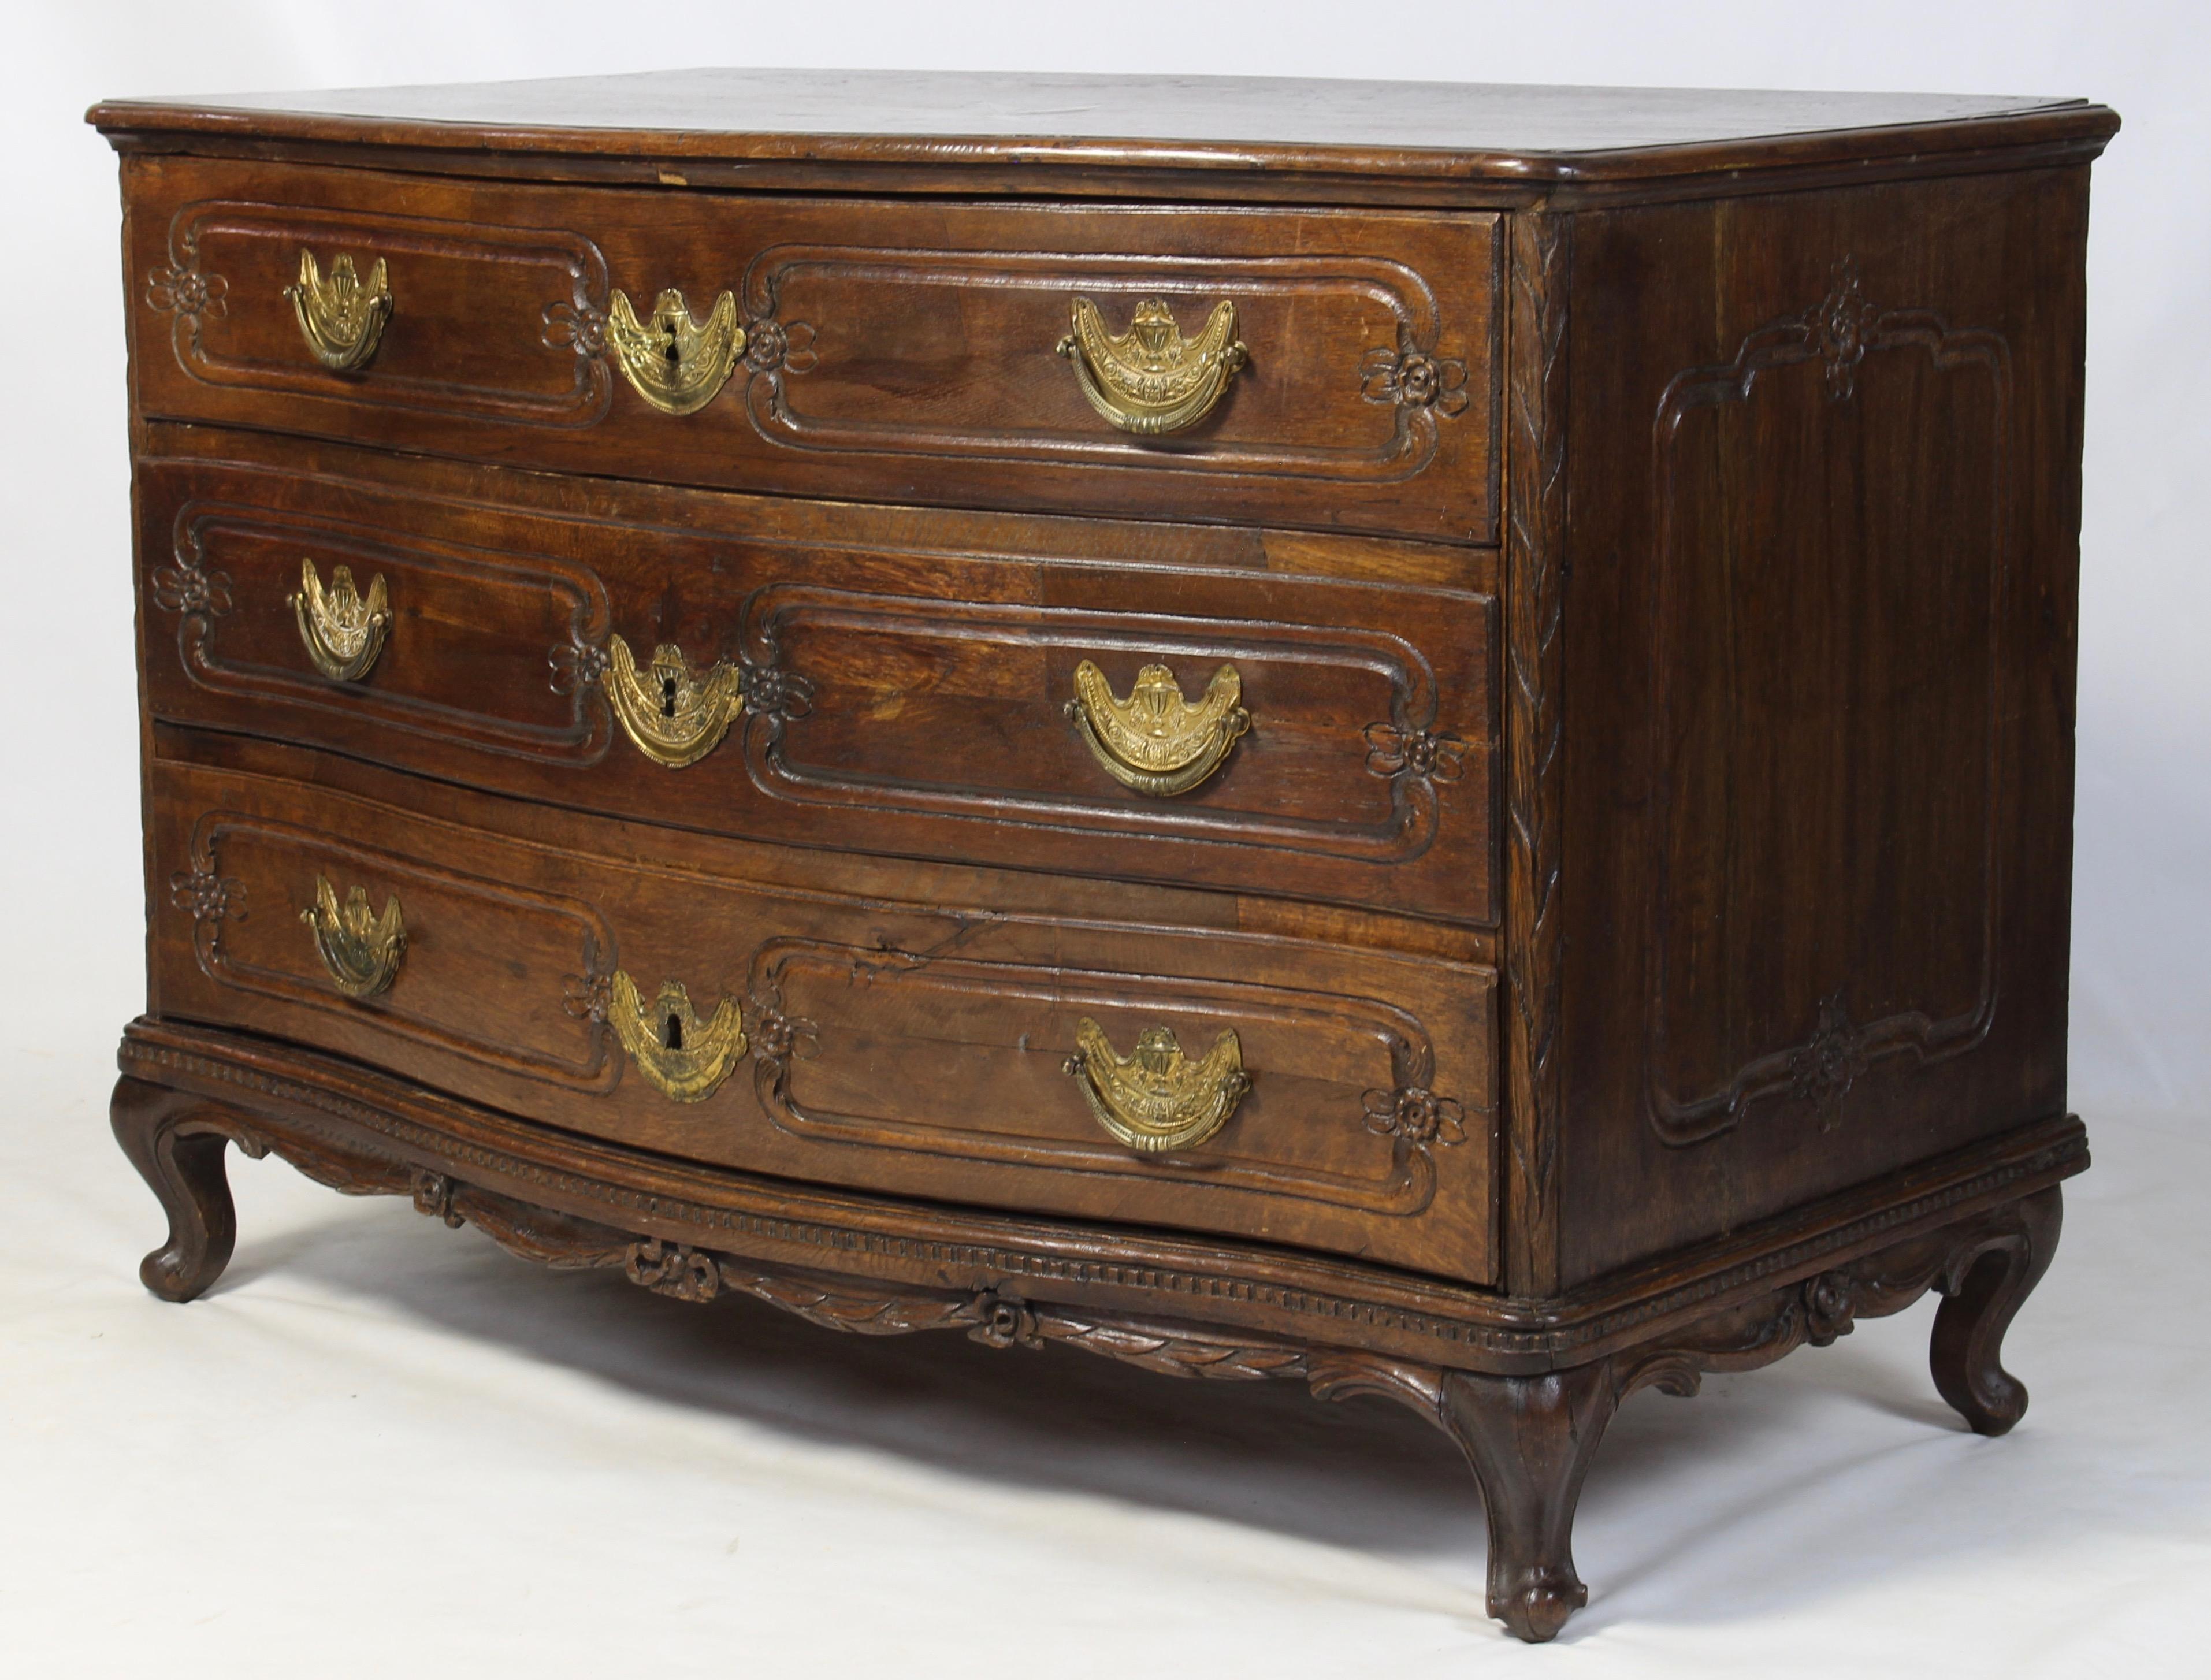 An elegant late 18th century serpentine front commode with marquetry top, three graduated drawers with original pulls resting on carved cabriole legs.